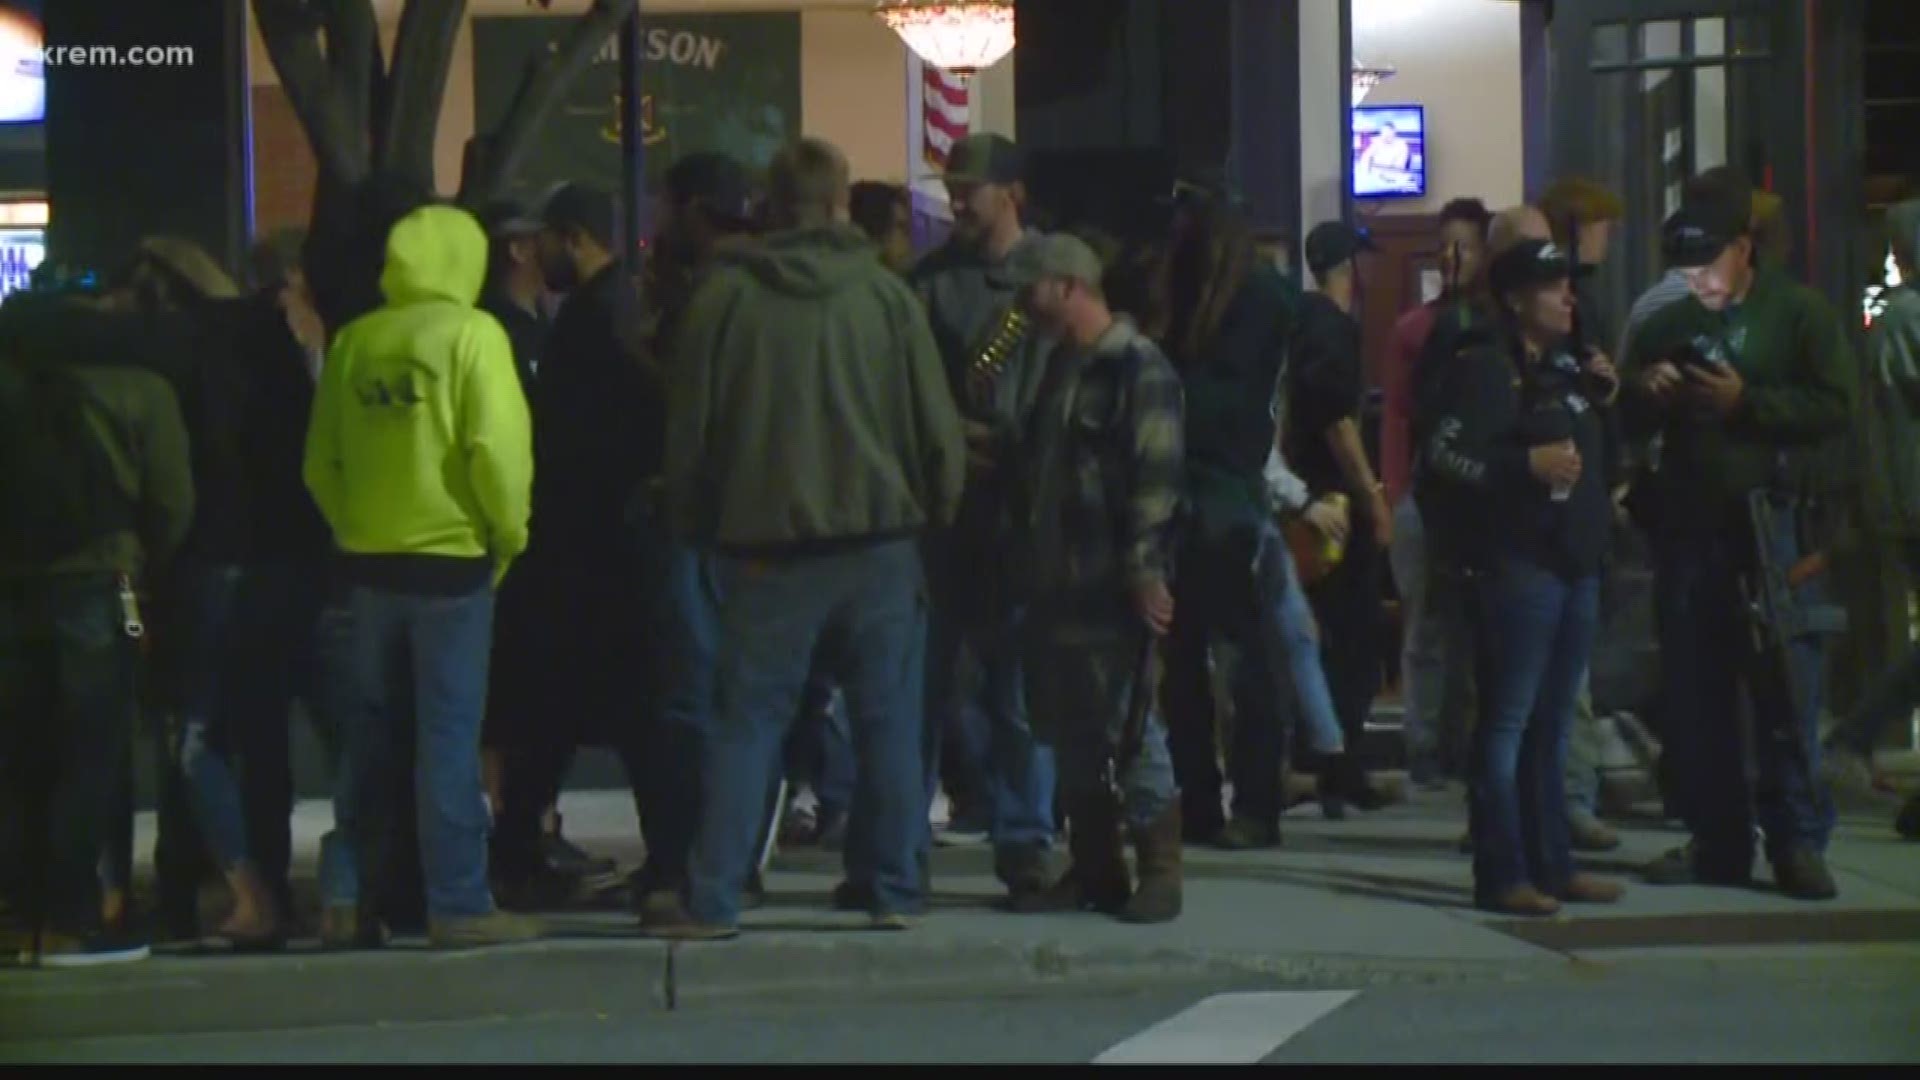 Protesters and armed citizens gathered in downtown Coeur d'Alene for the second straight night in response to the death of George Floyd.